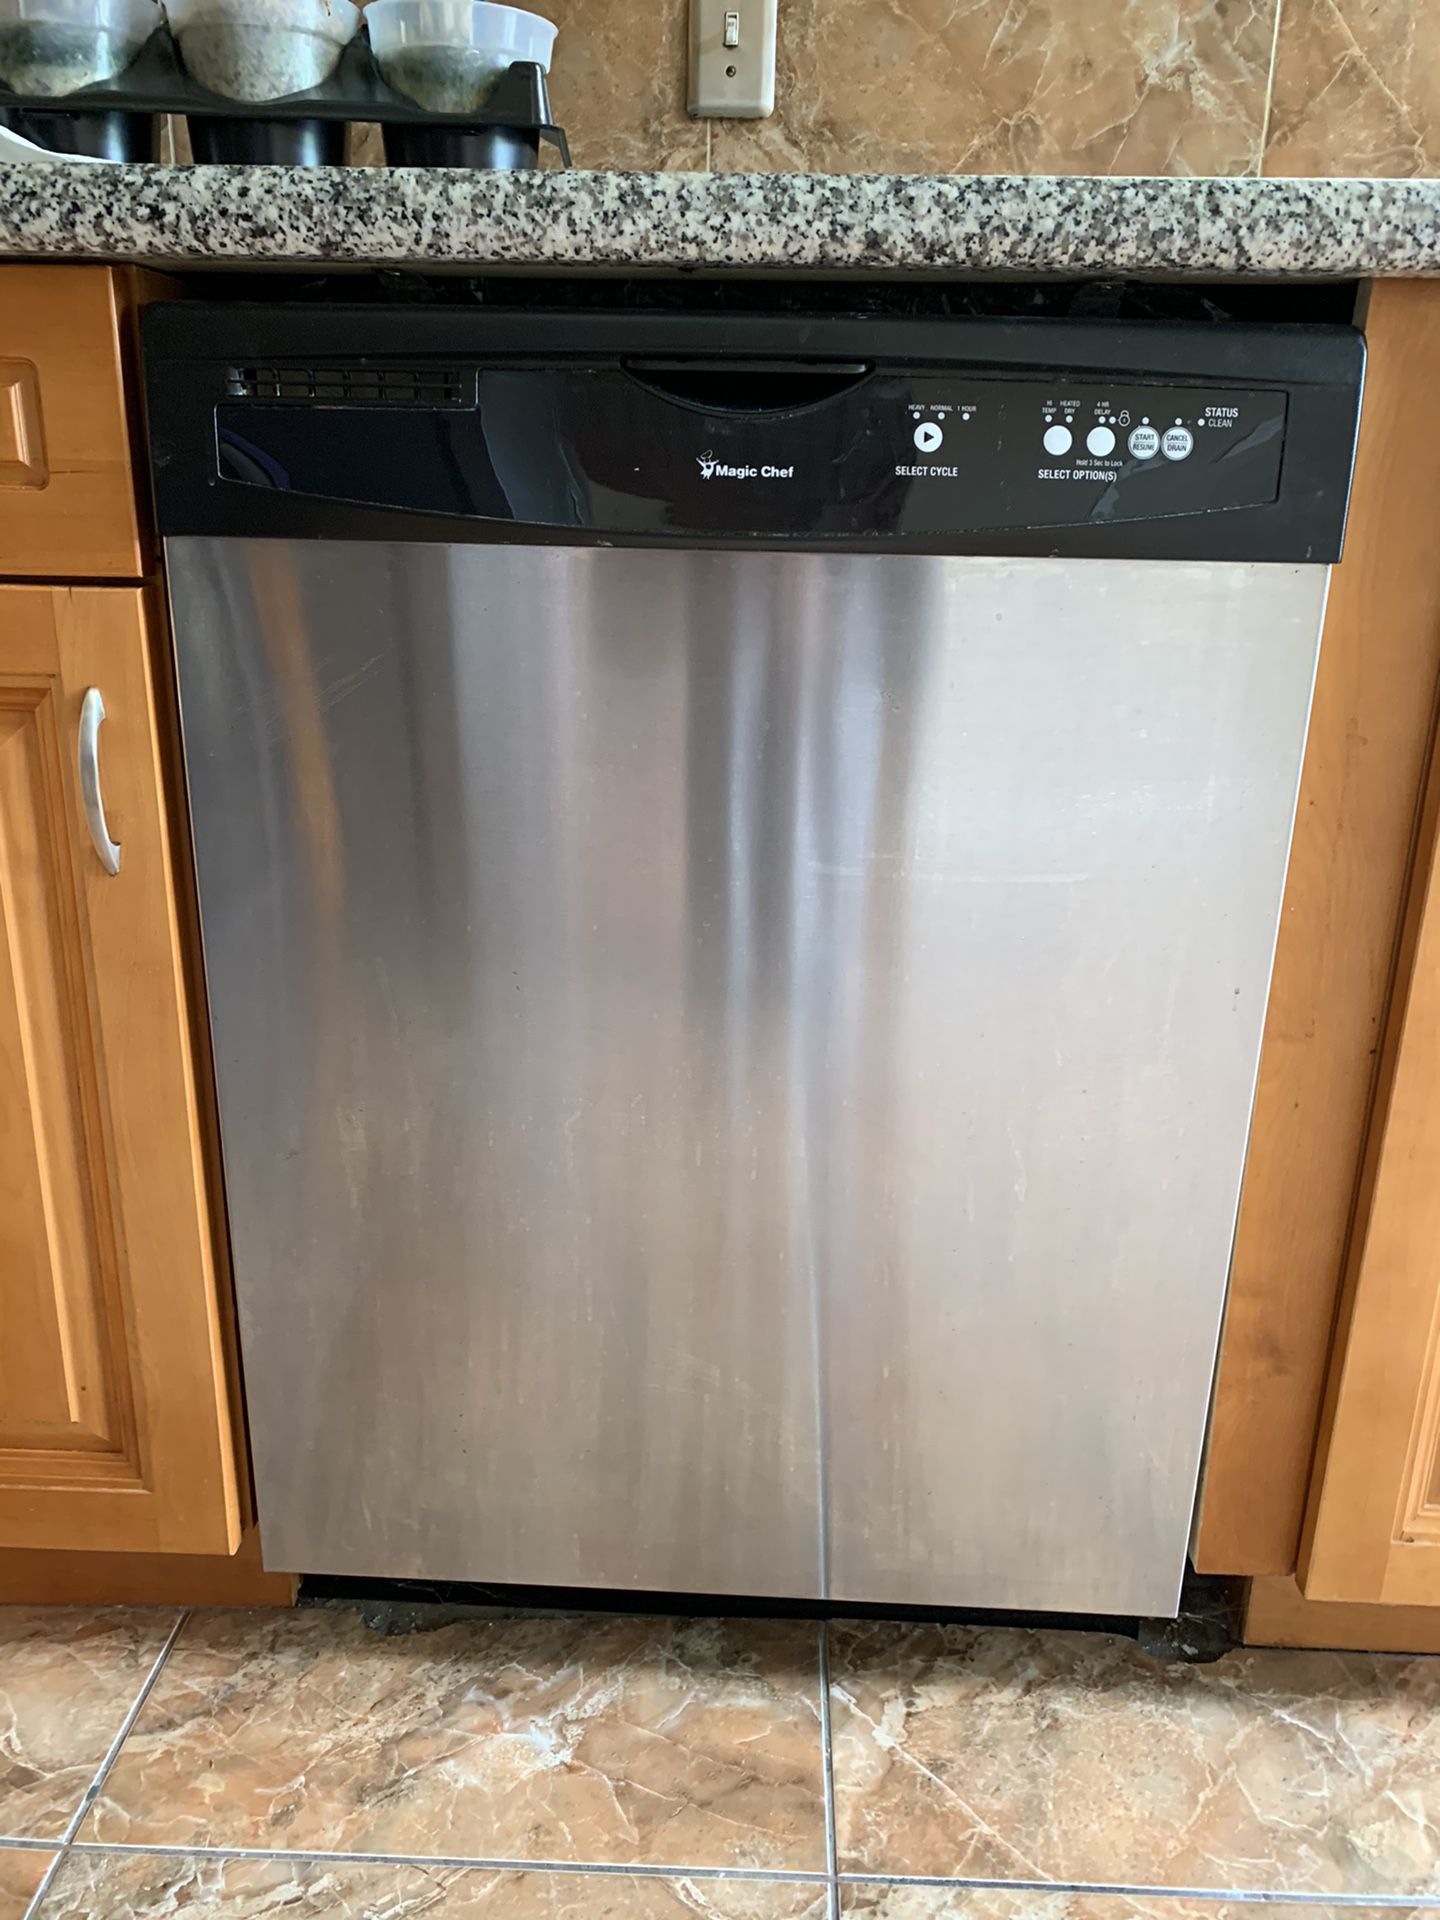 Stove, Refrigerator, Microwave and Dishwasher